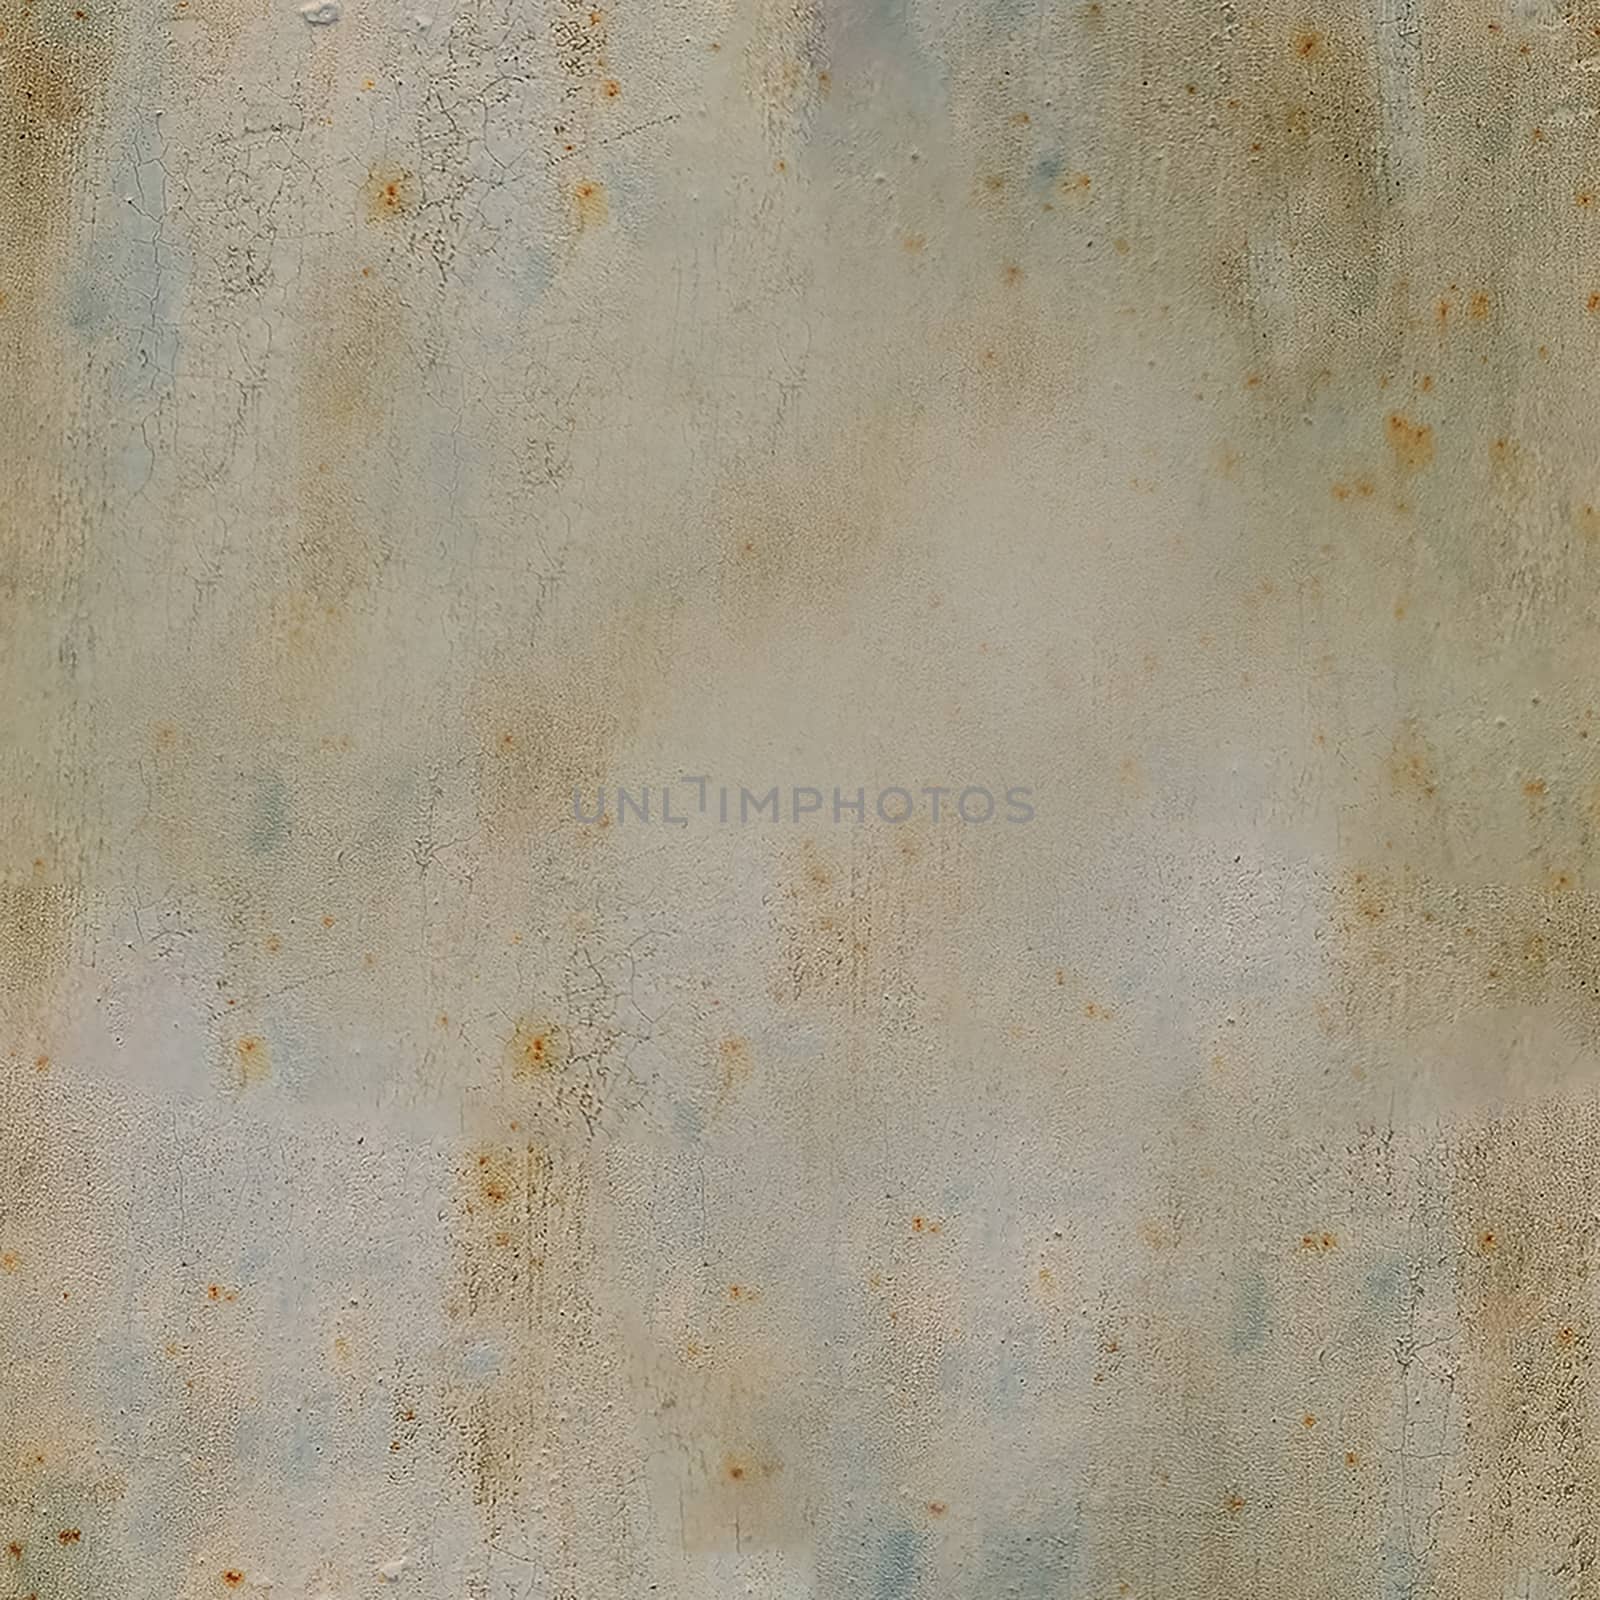 Rusty metal surface texture close up photo. Texture for designers by galinasharapova